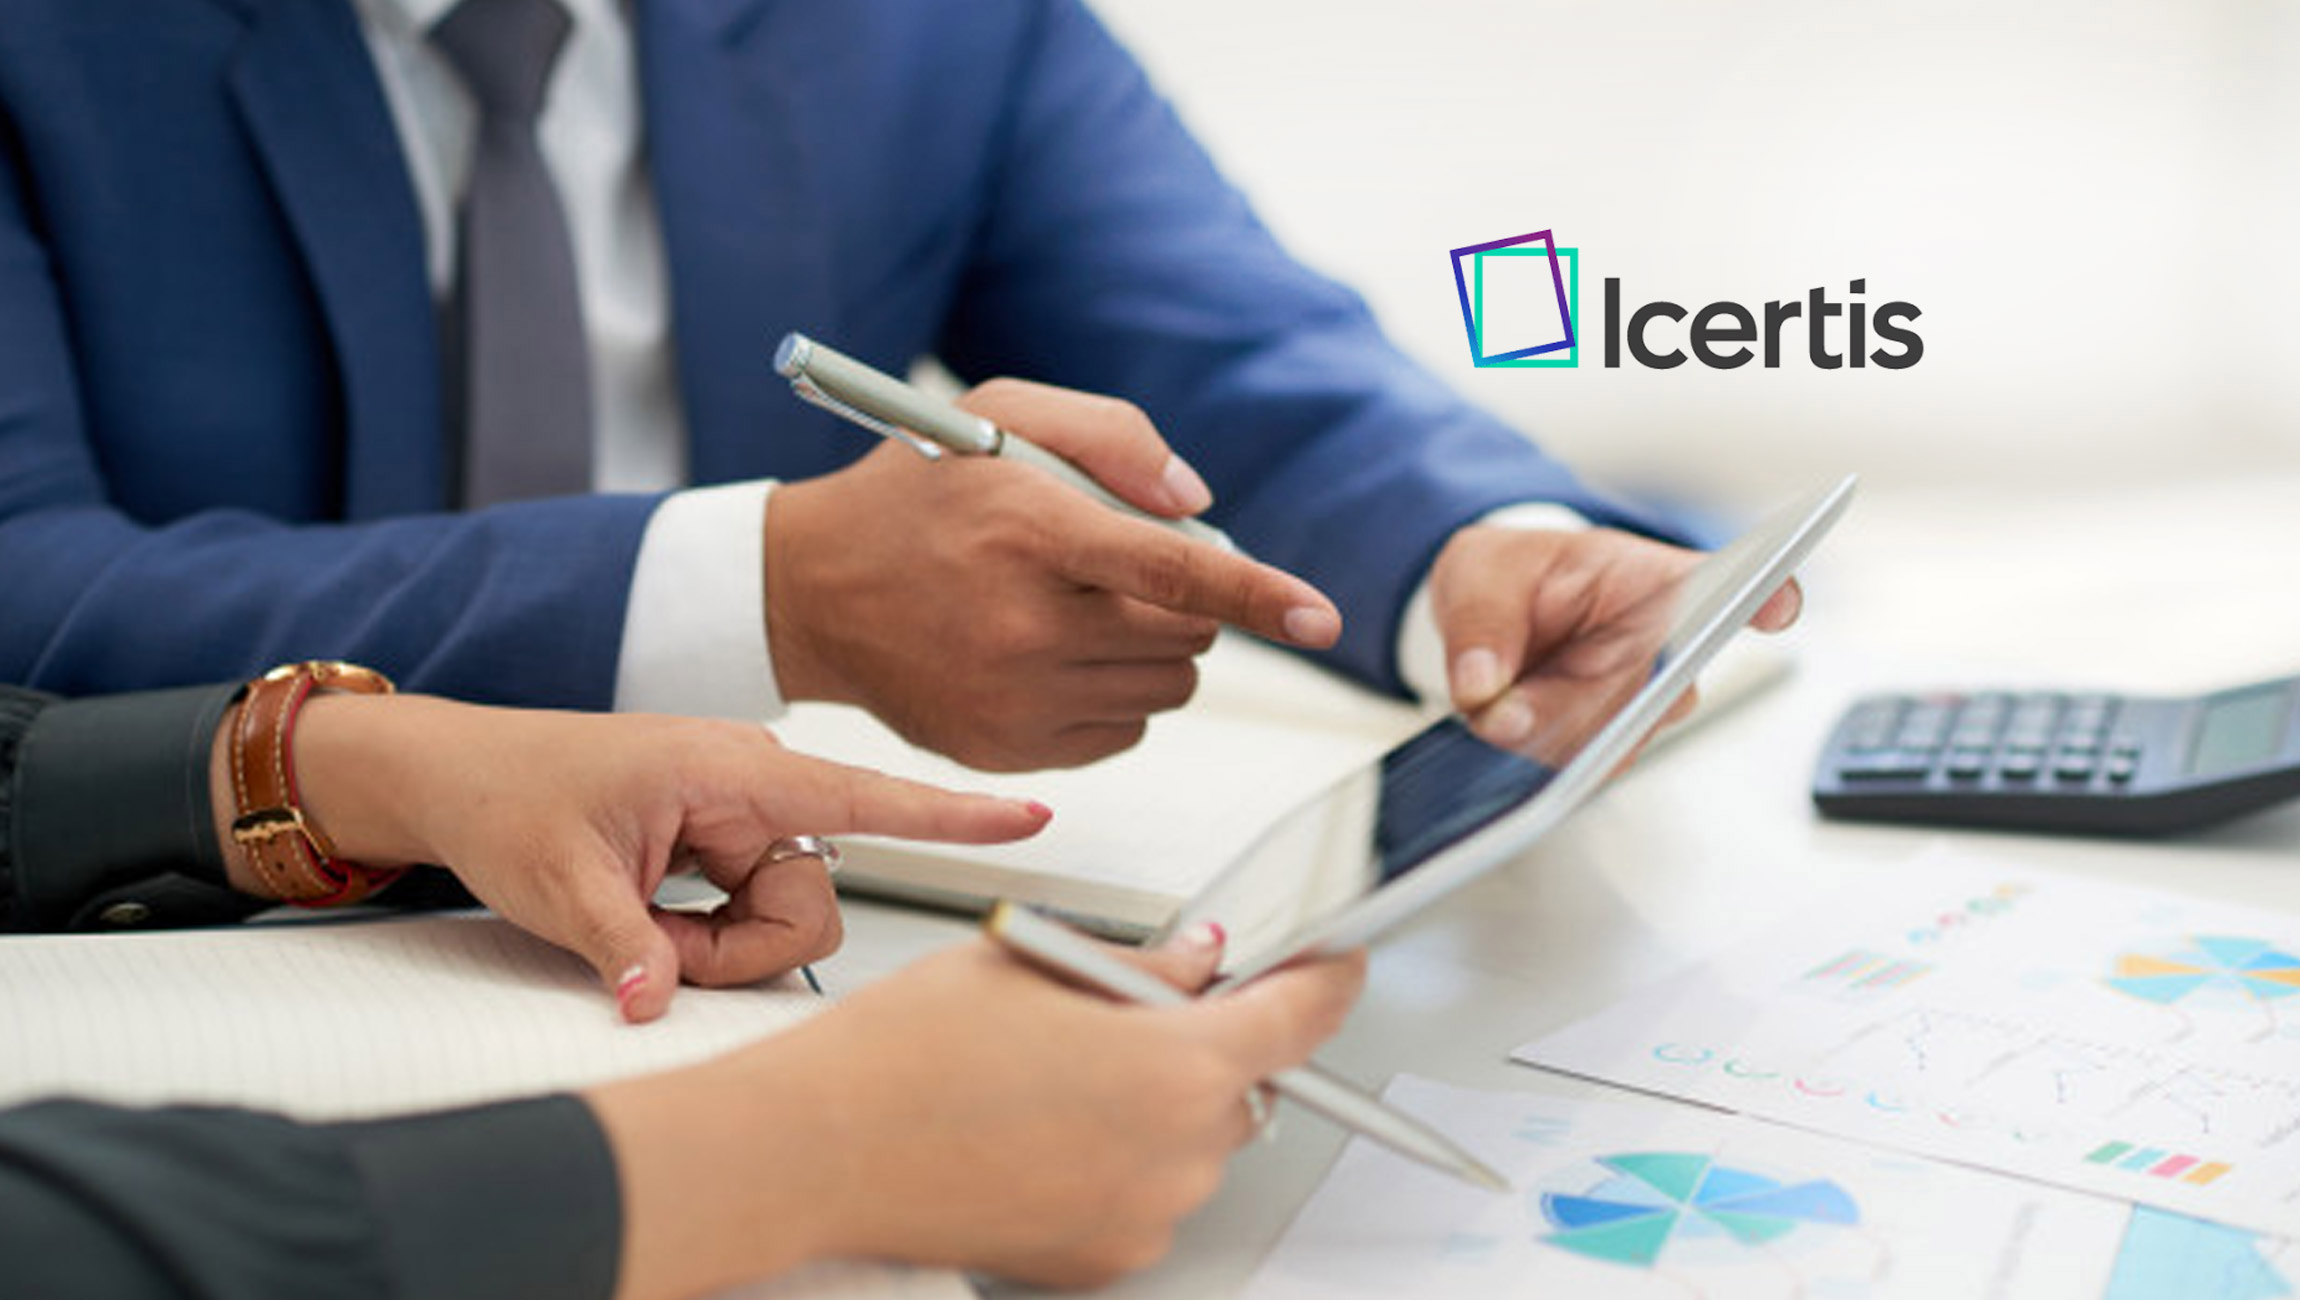 Icertis Named a Leader in IDC MarketScape for Contract Lifecycle Management